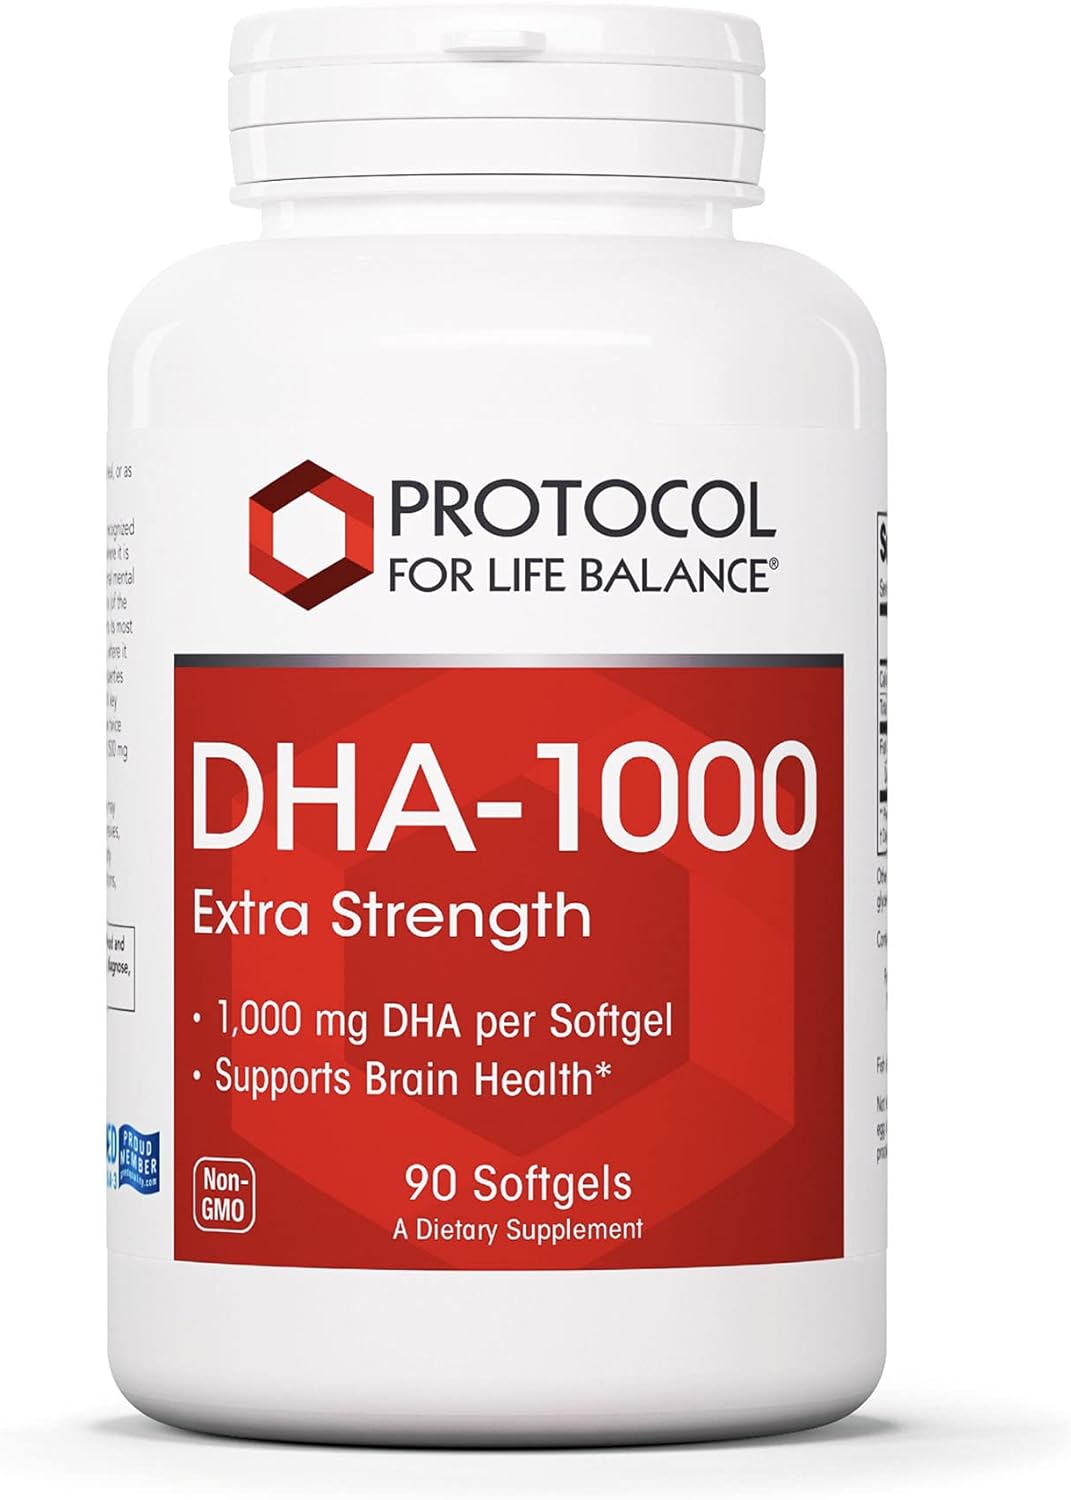 PROTOCOL FOR LIFE BALANCE - DHA 1000 mg Extra Strength - Supports Brai